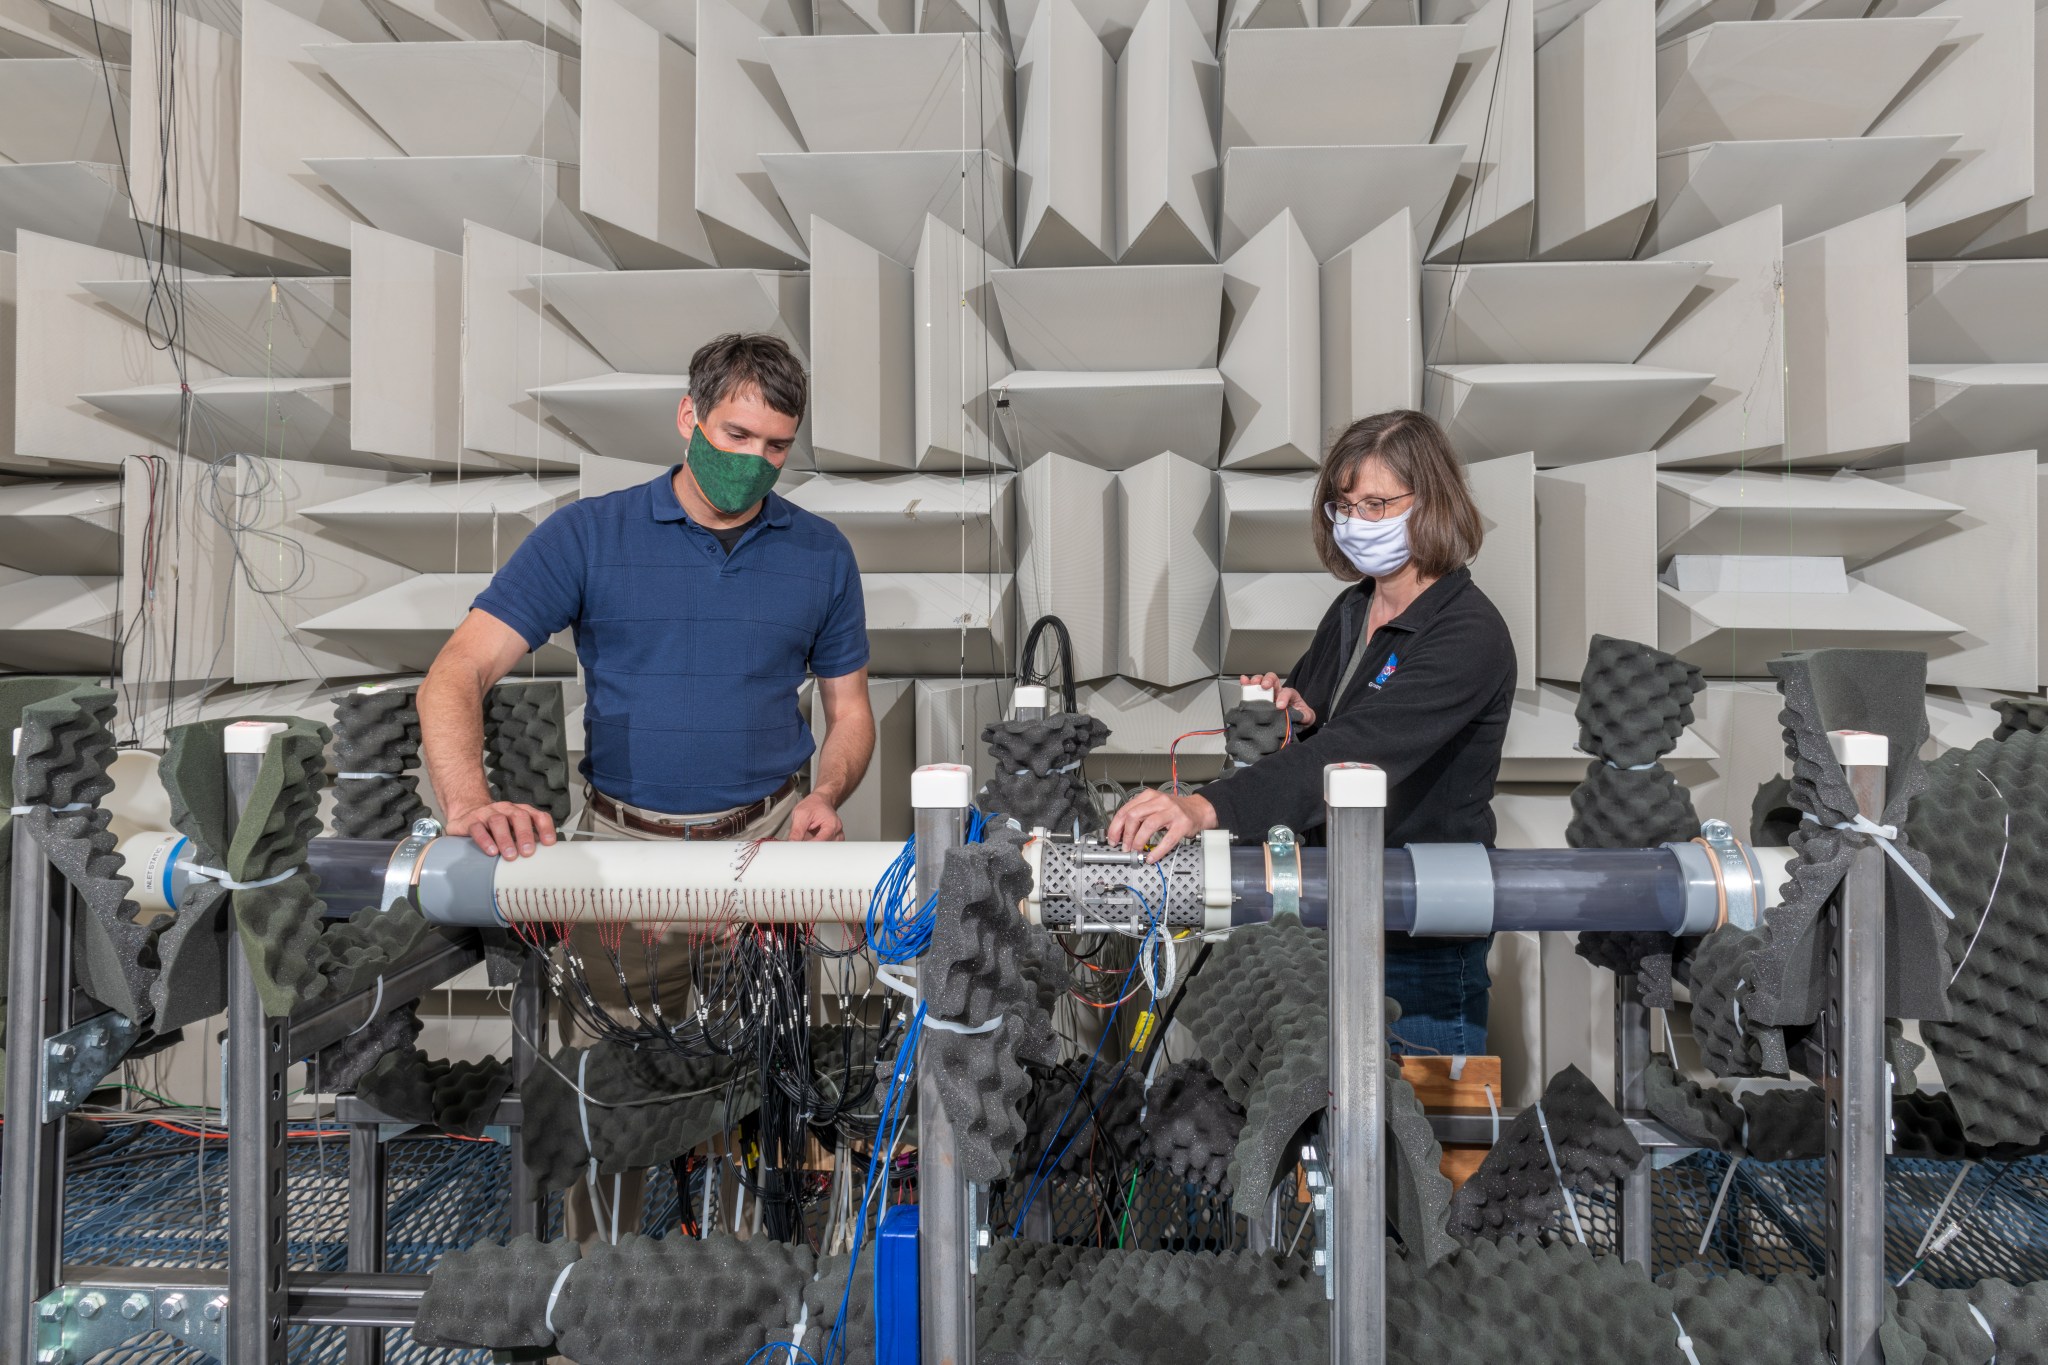 : A man and a woman wearing masks work on equipment inside a NASA acoustic facility. Large tan fiberglass wedges line the walls of the facility.